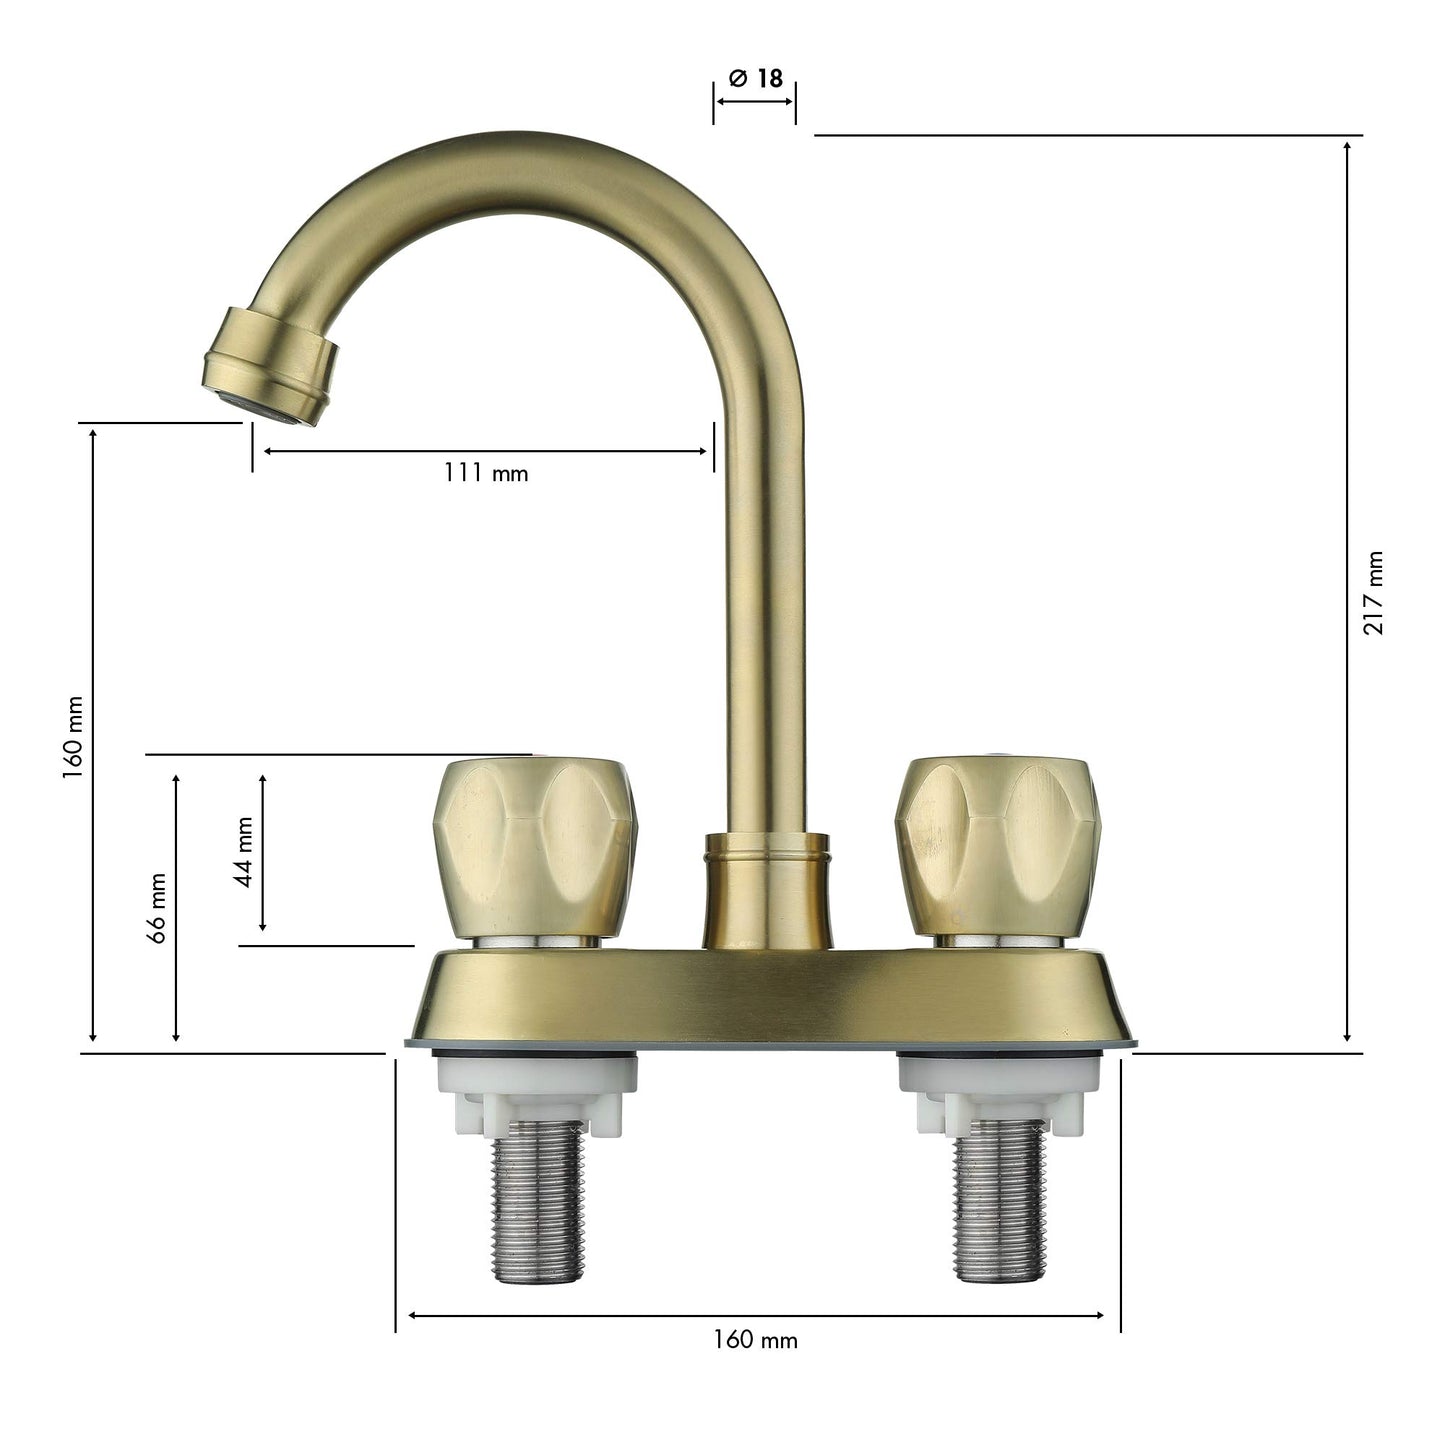 2-Handle Stainless Steel Bathroom Faucet Set with Brushed Gold Finish